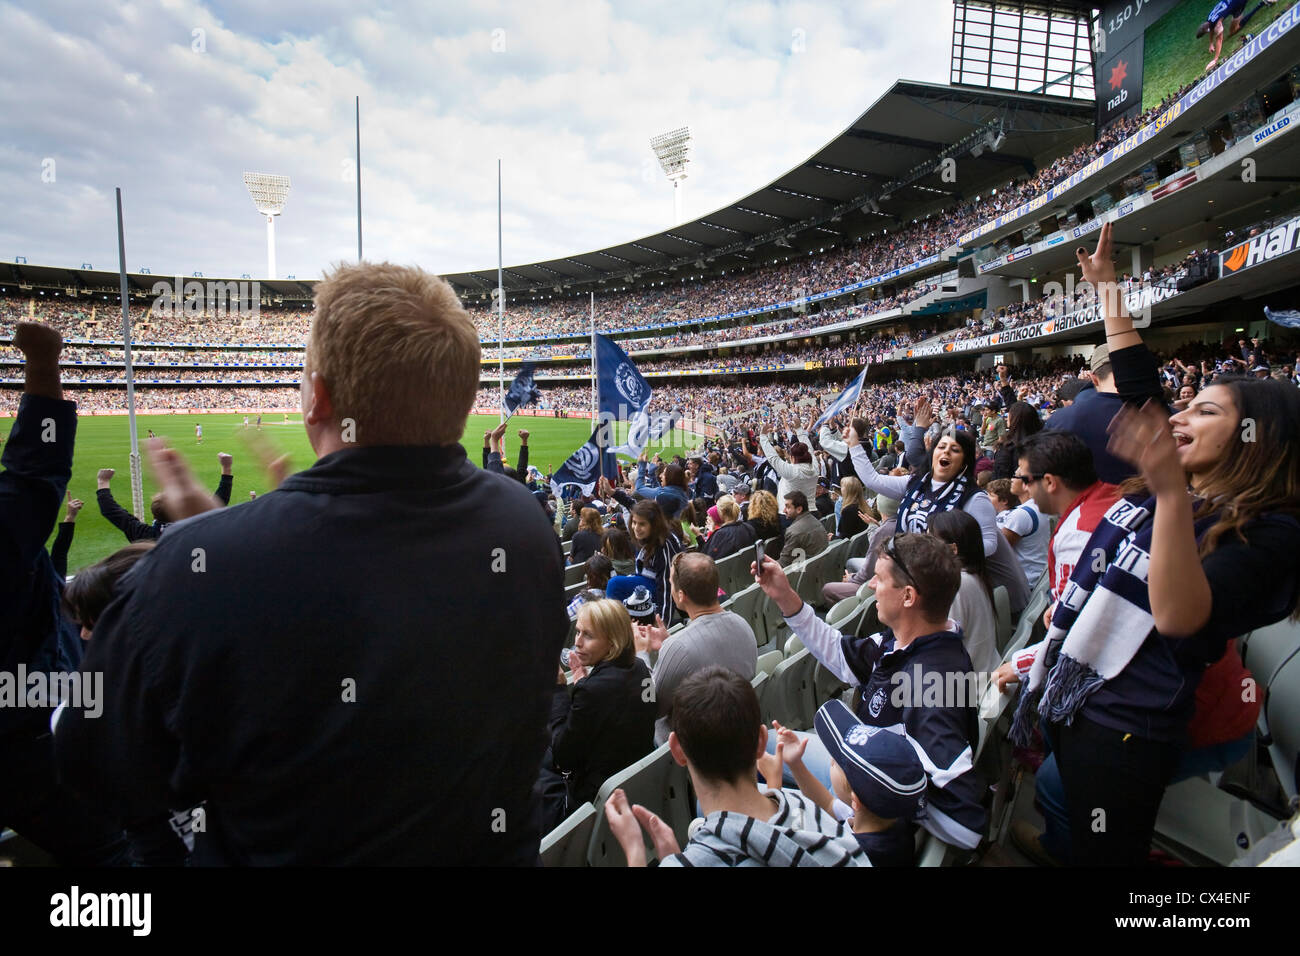 Supporters cheer on their teams during an Australian Rules football game at the MCG.  Melbourne, Victoria, AUSTRALIA Stock Photo